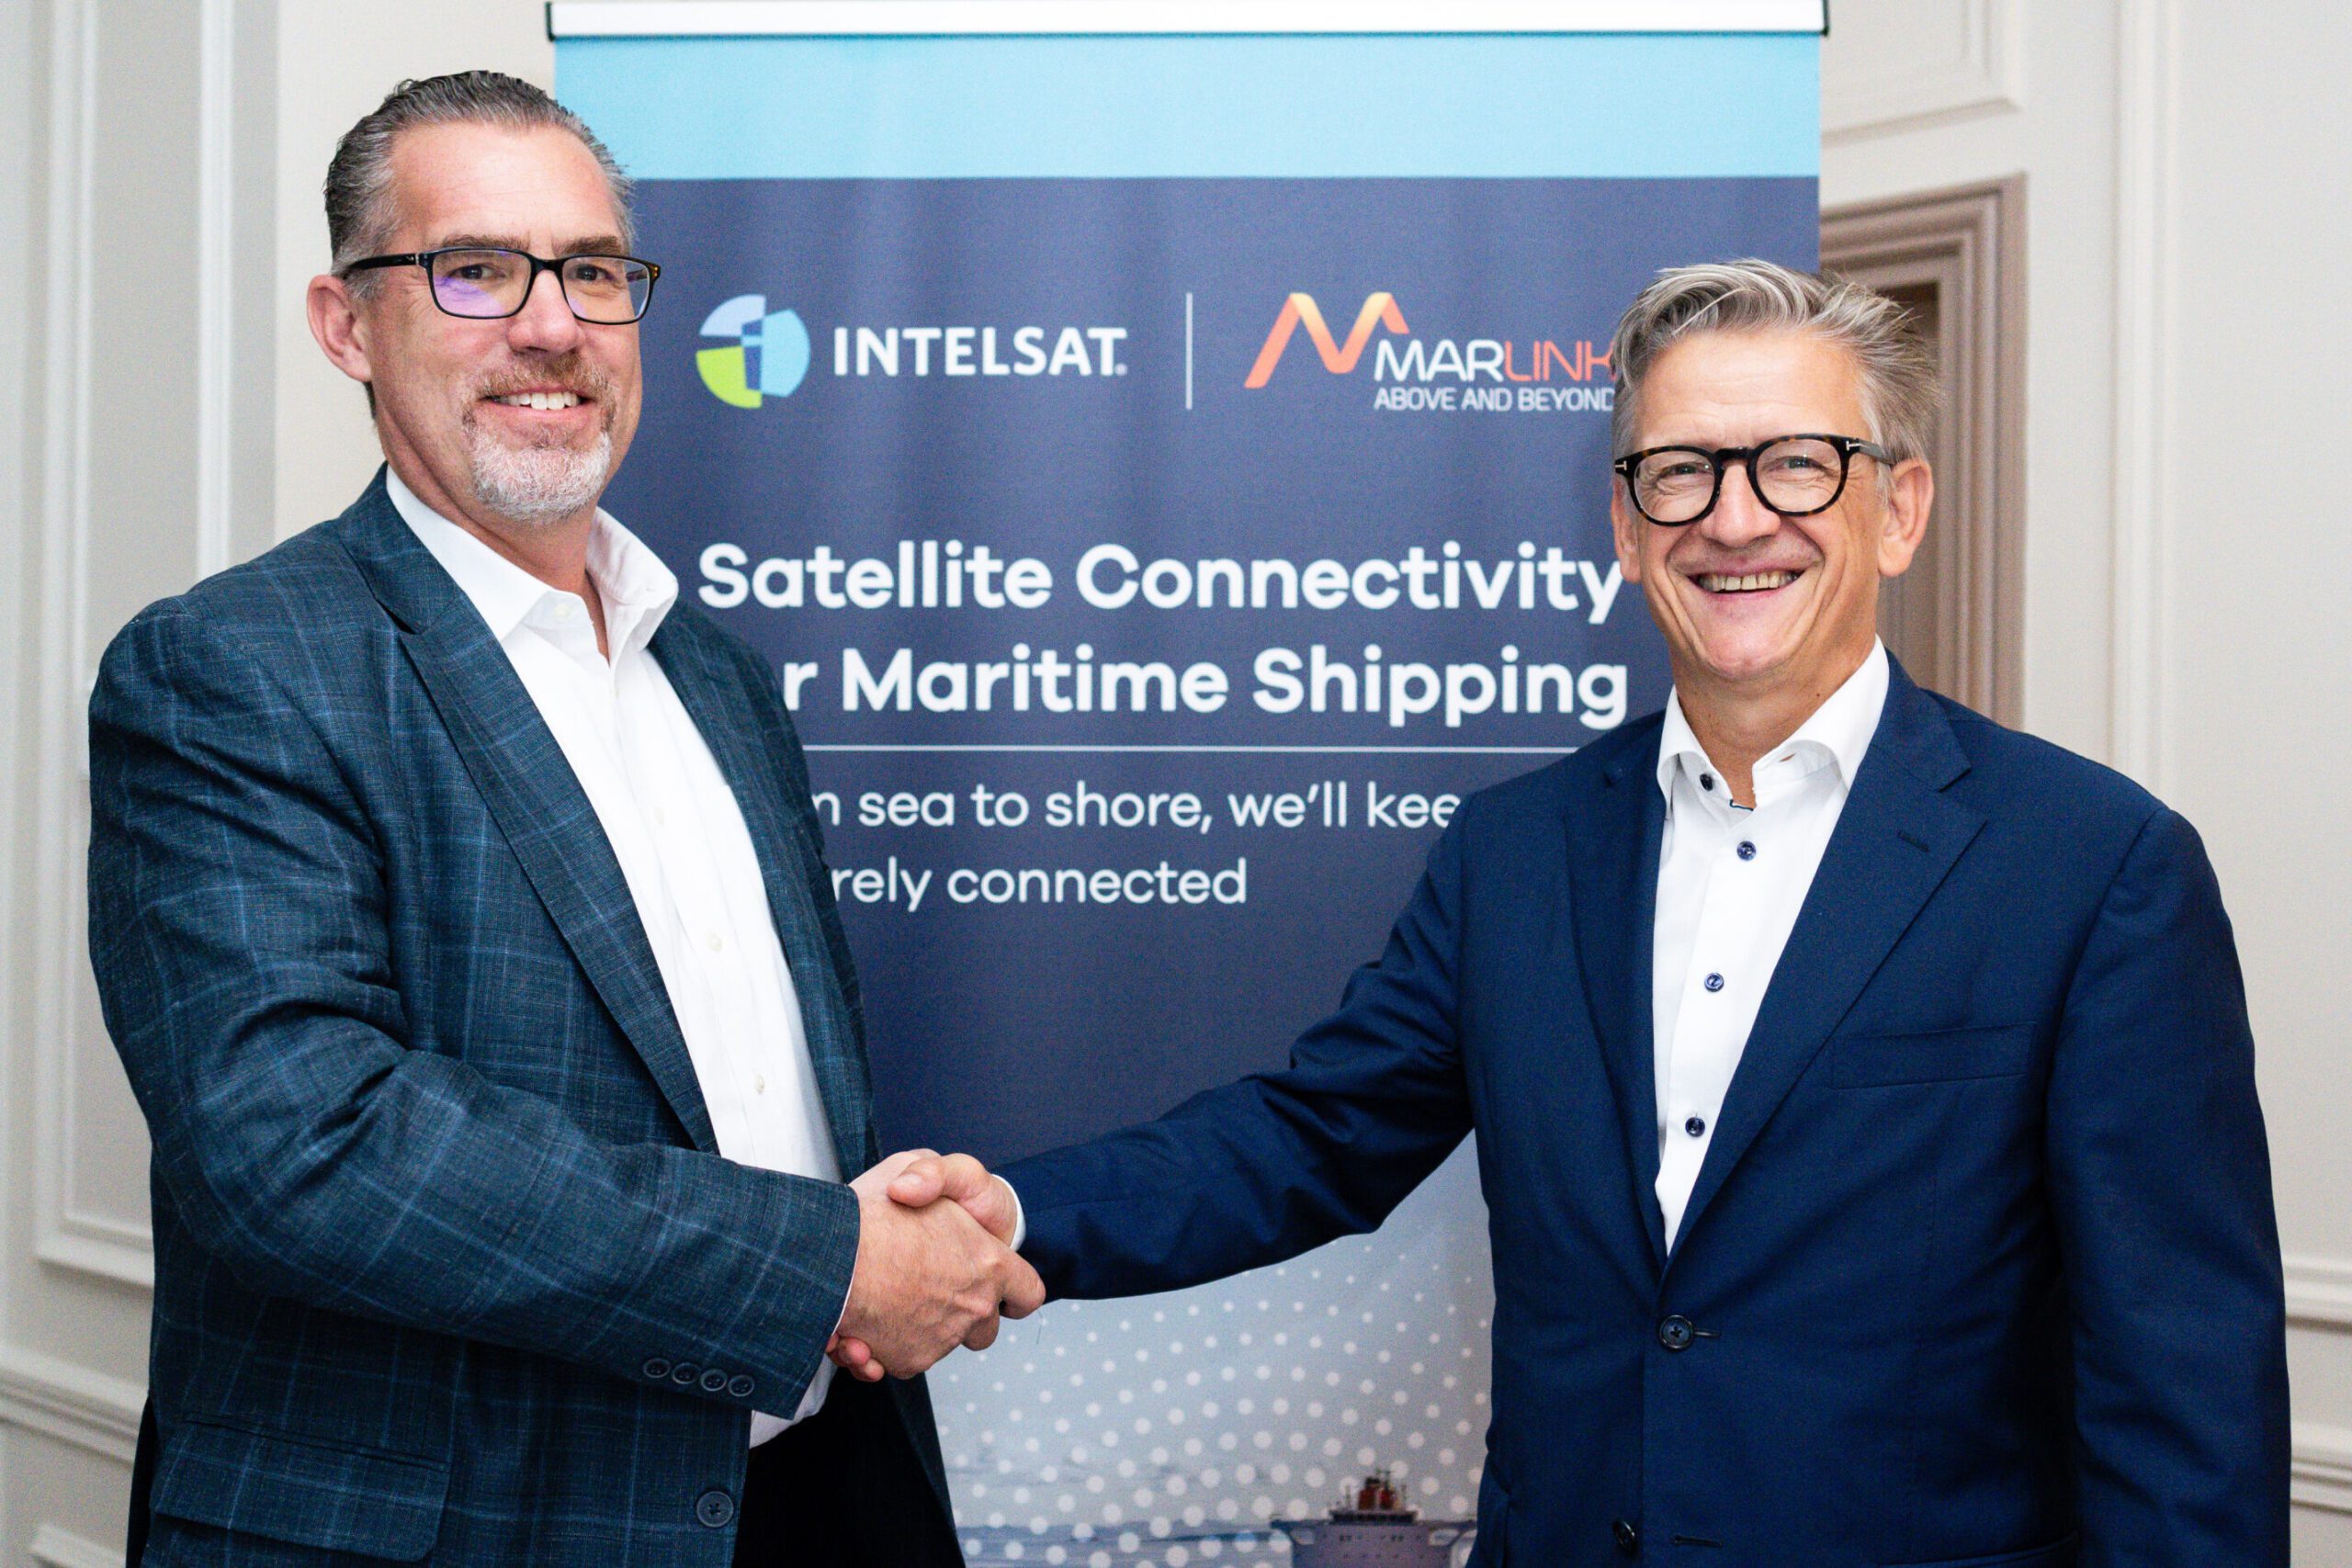 Marlink Renews Agreement With Intelsat To Deliver High Throughput Global VSAT Capacity